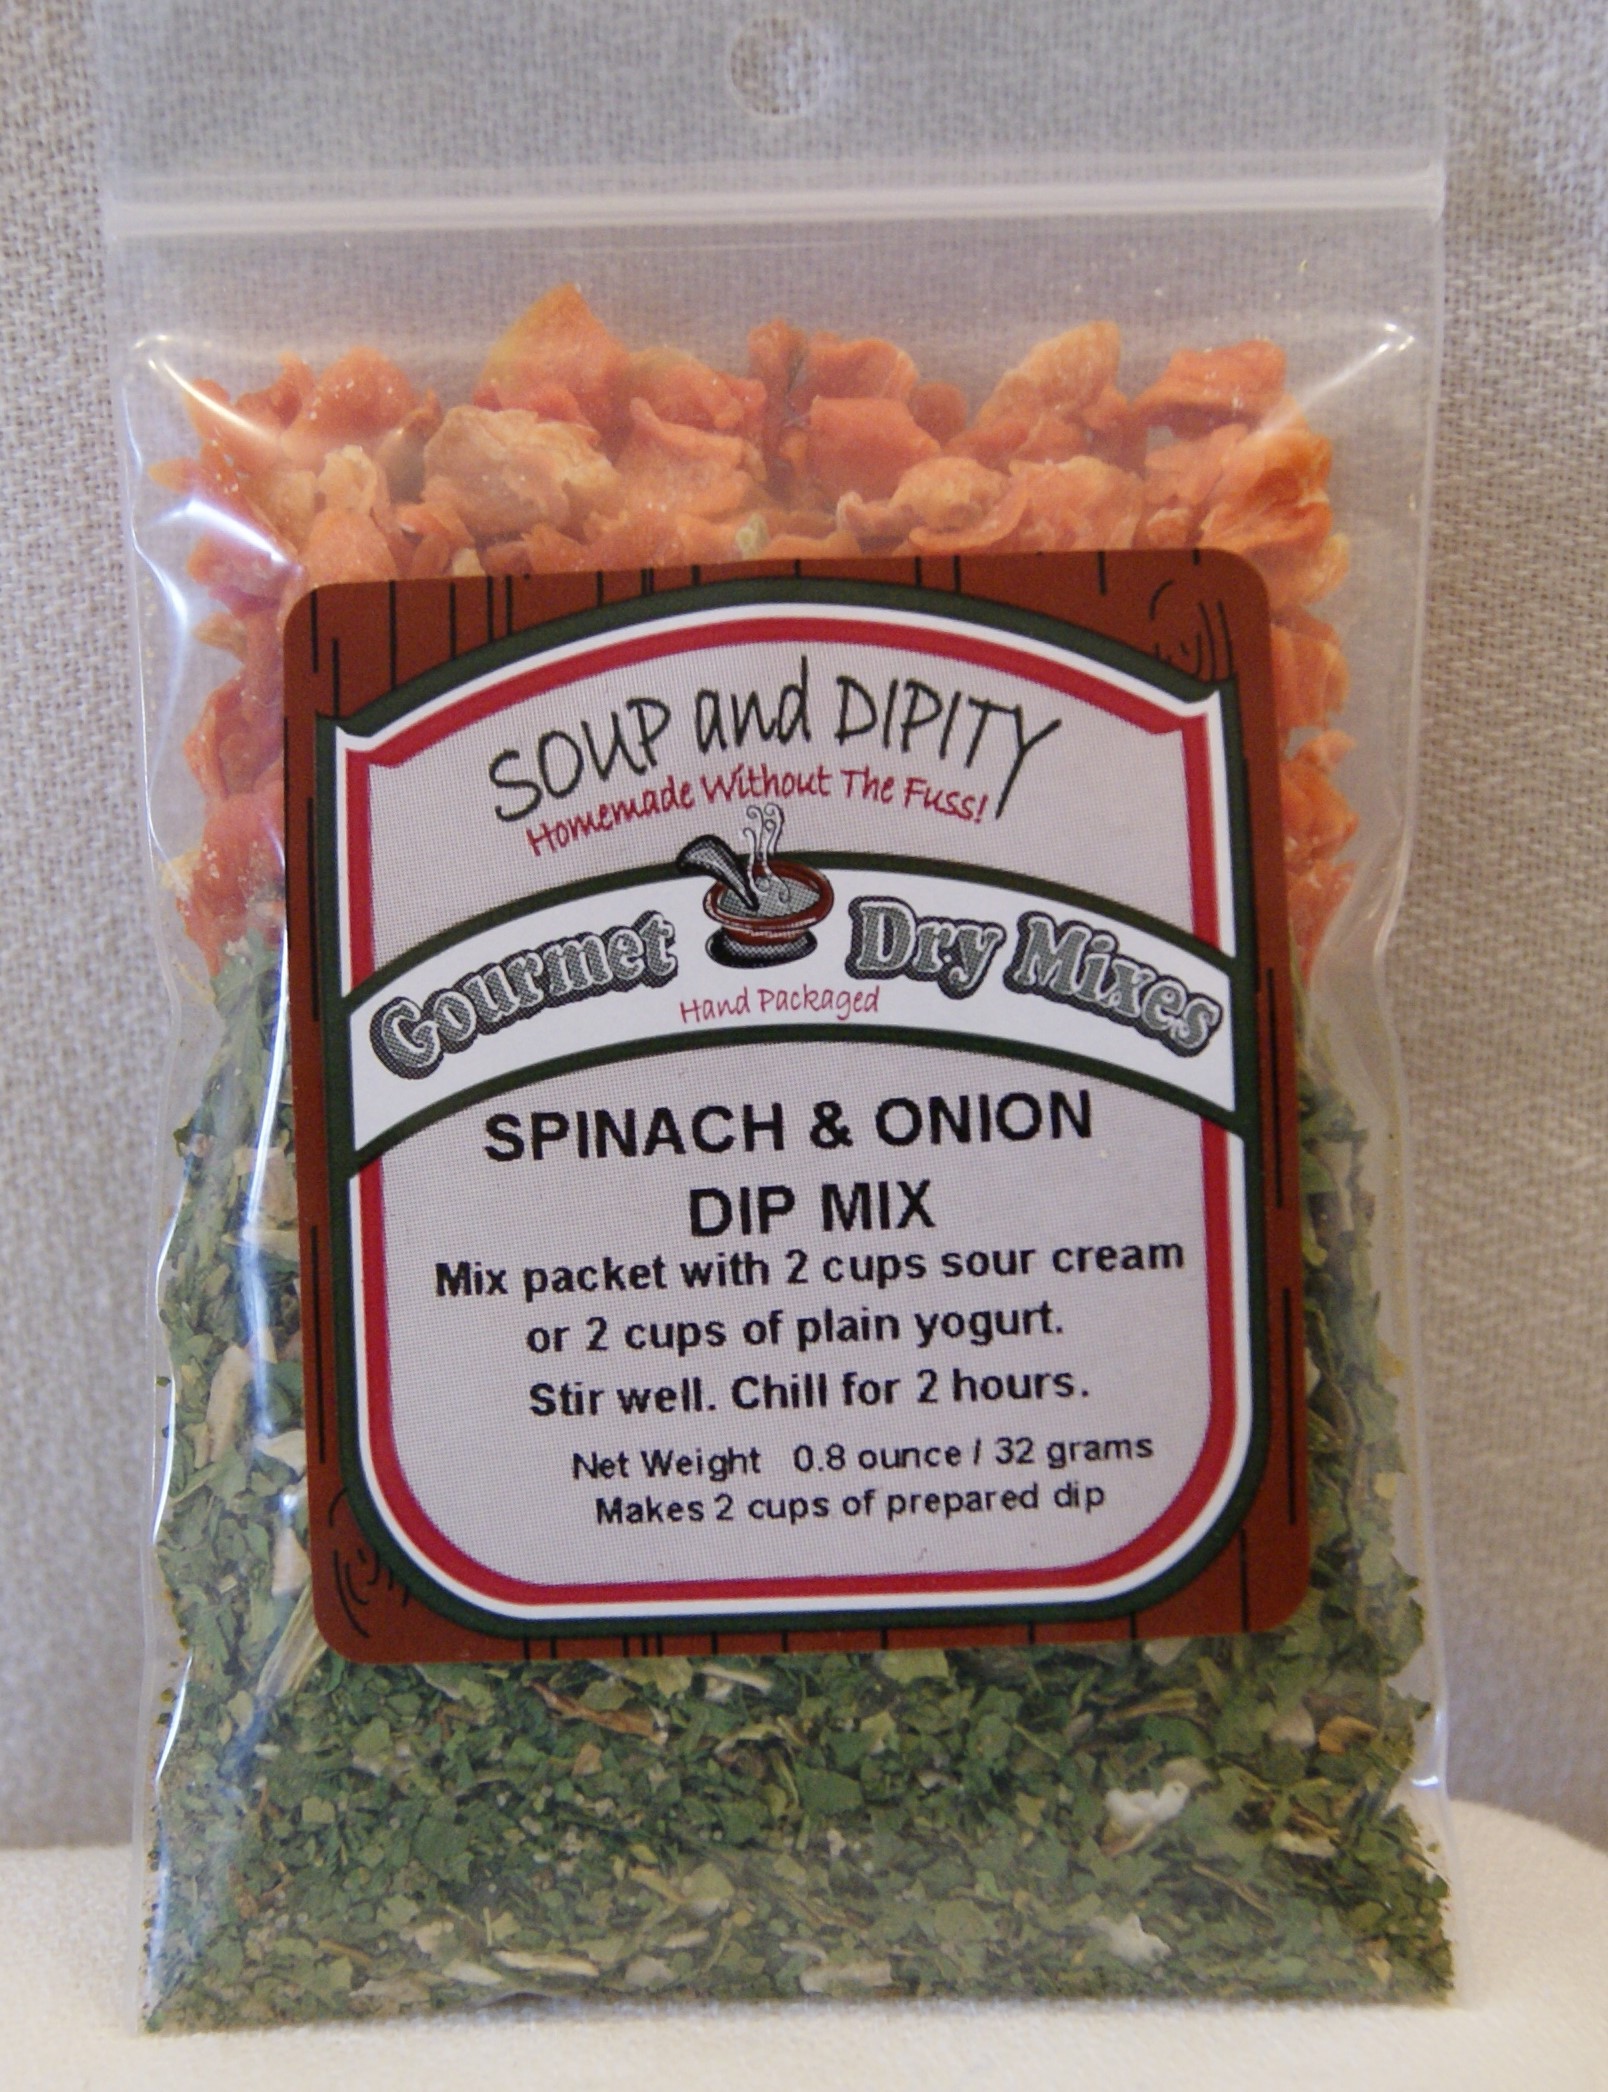 Spinach & Onion Dip Mix